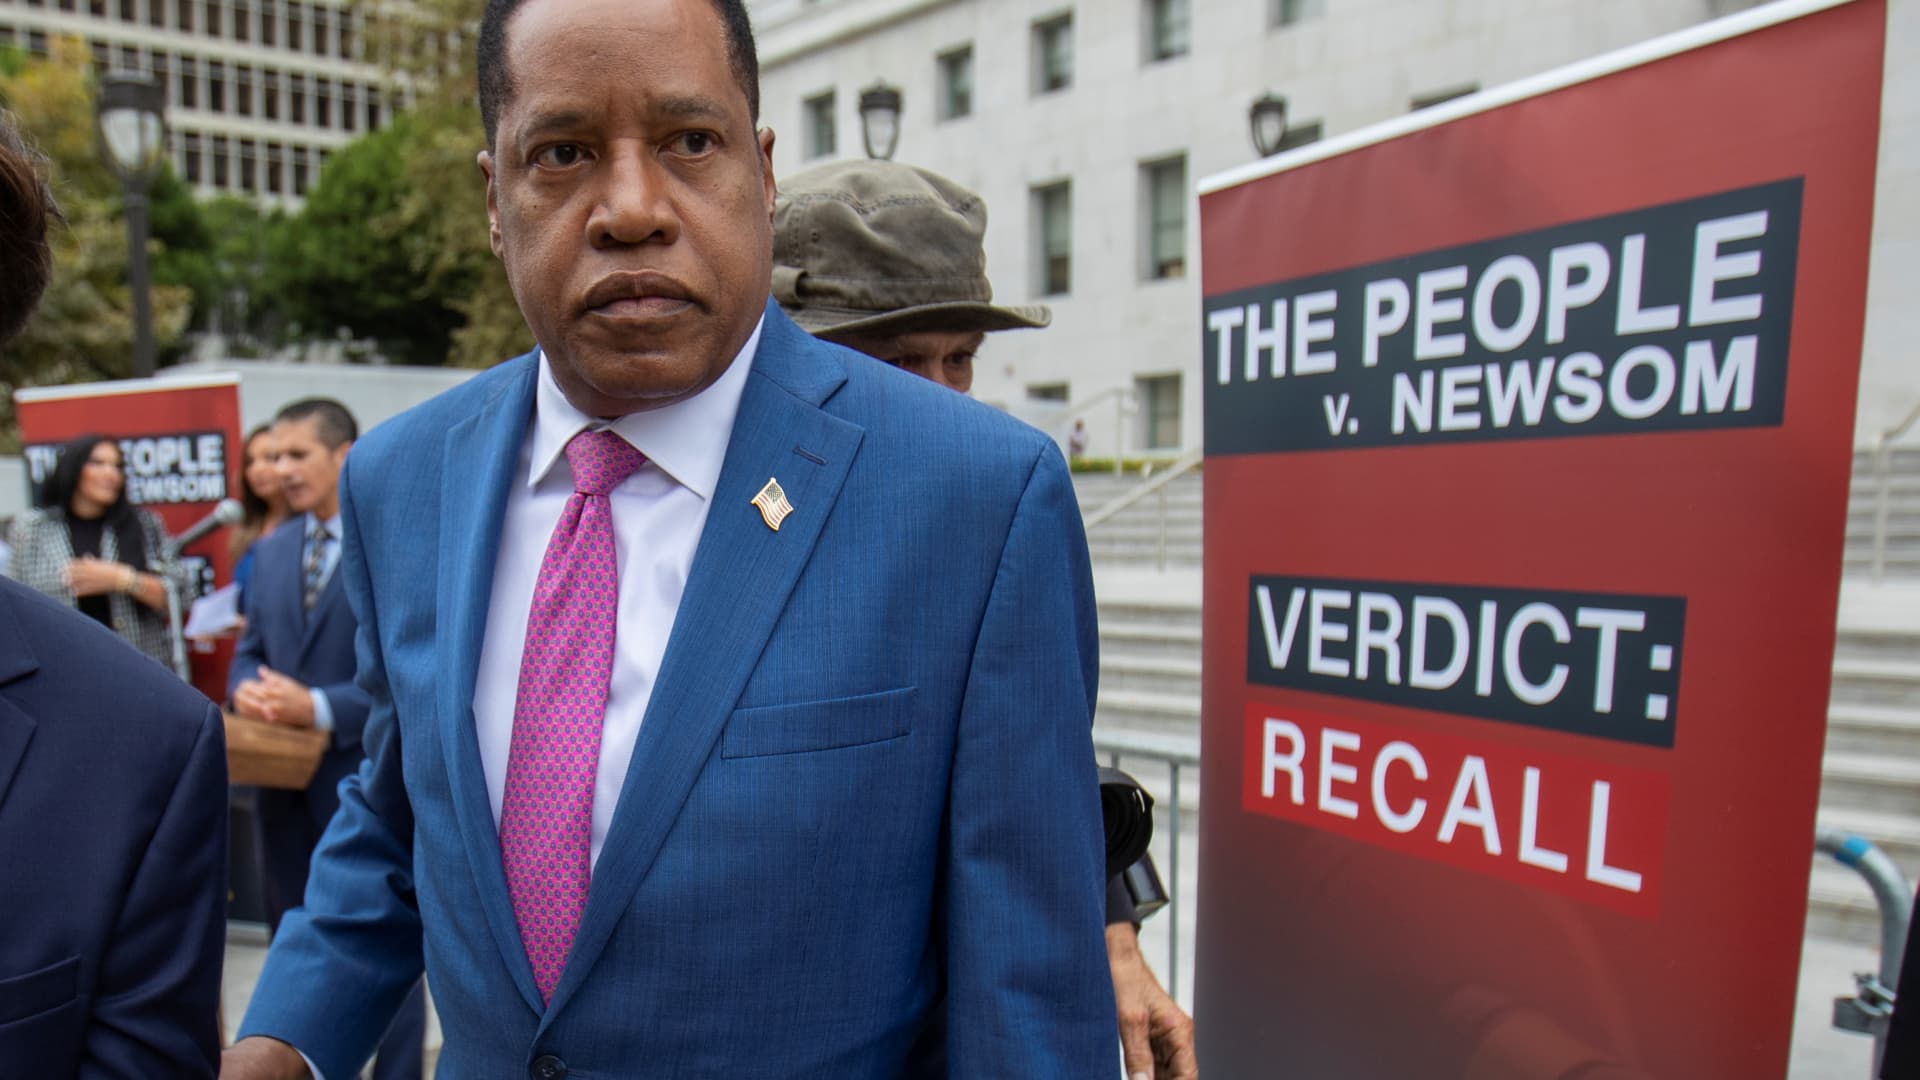 Republican gubernatorial recall candidate Larry Elder campaigns against current California Governor Gavin Newsom during the recall election for California governor in Los Angeles, California, September 2, 2021.